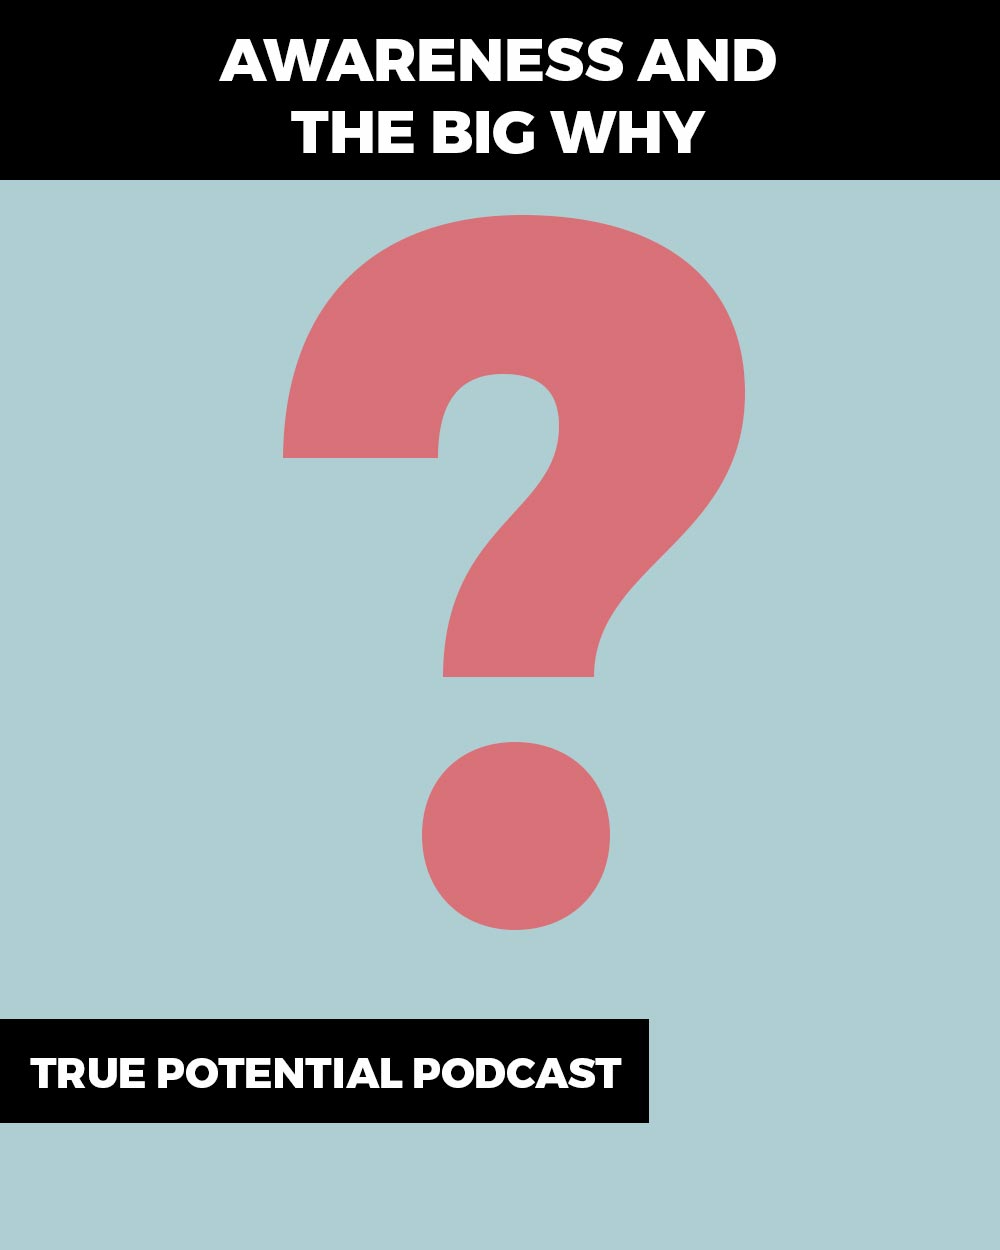 Awareness and the big why - how to find the purpose behind what you do - find your why